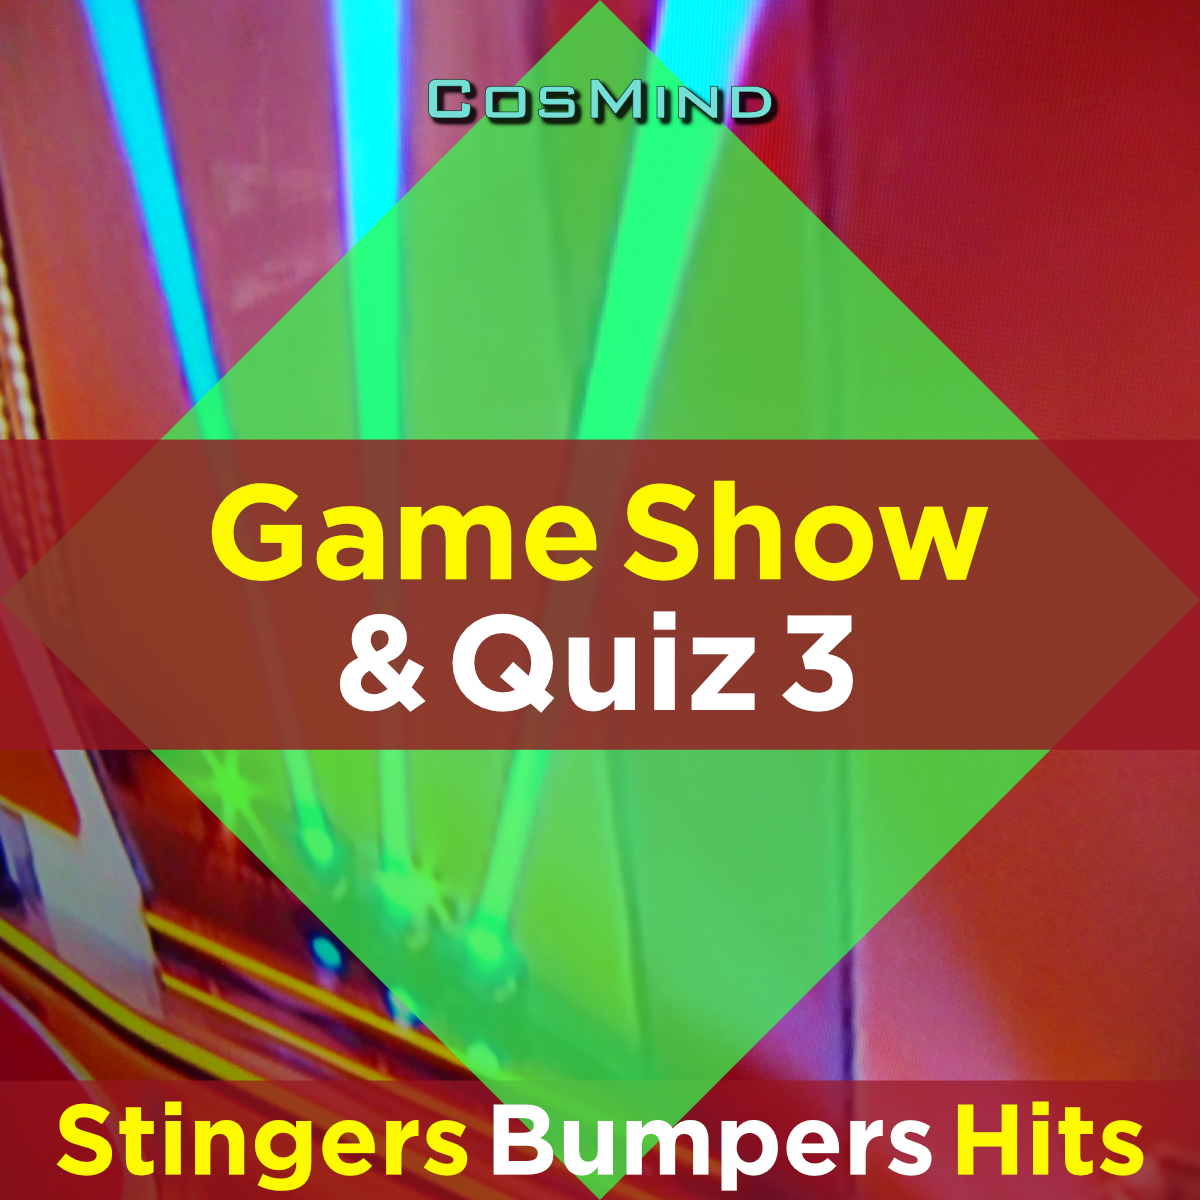 Game Show & Quiz 3 - Stingers Bumpers Hits